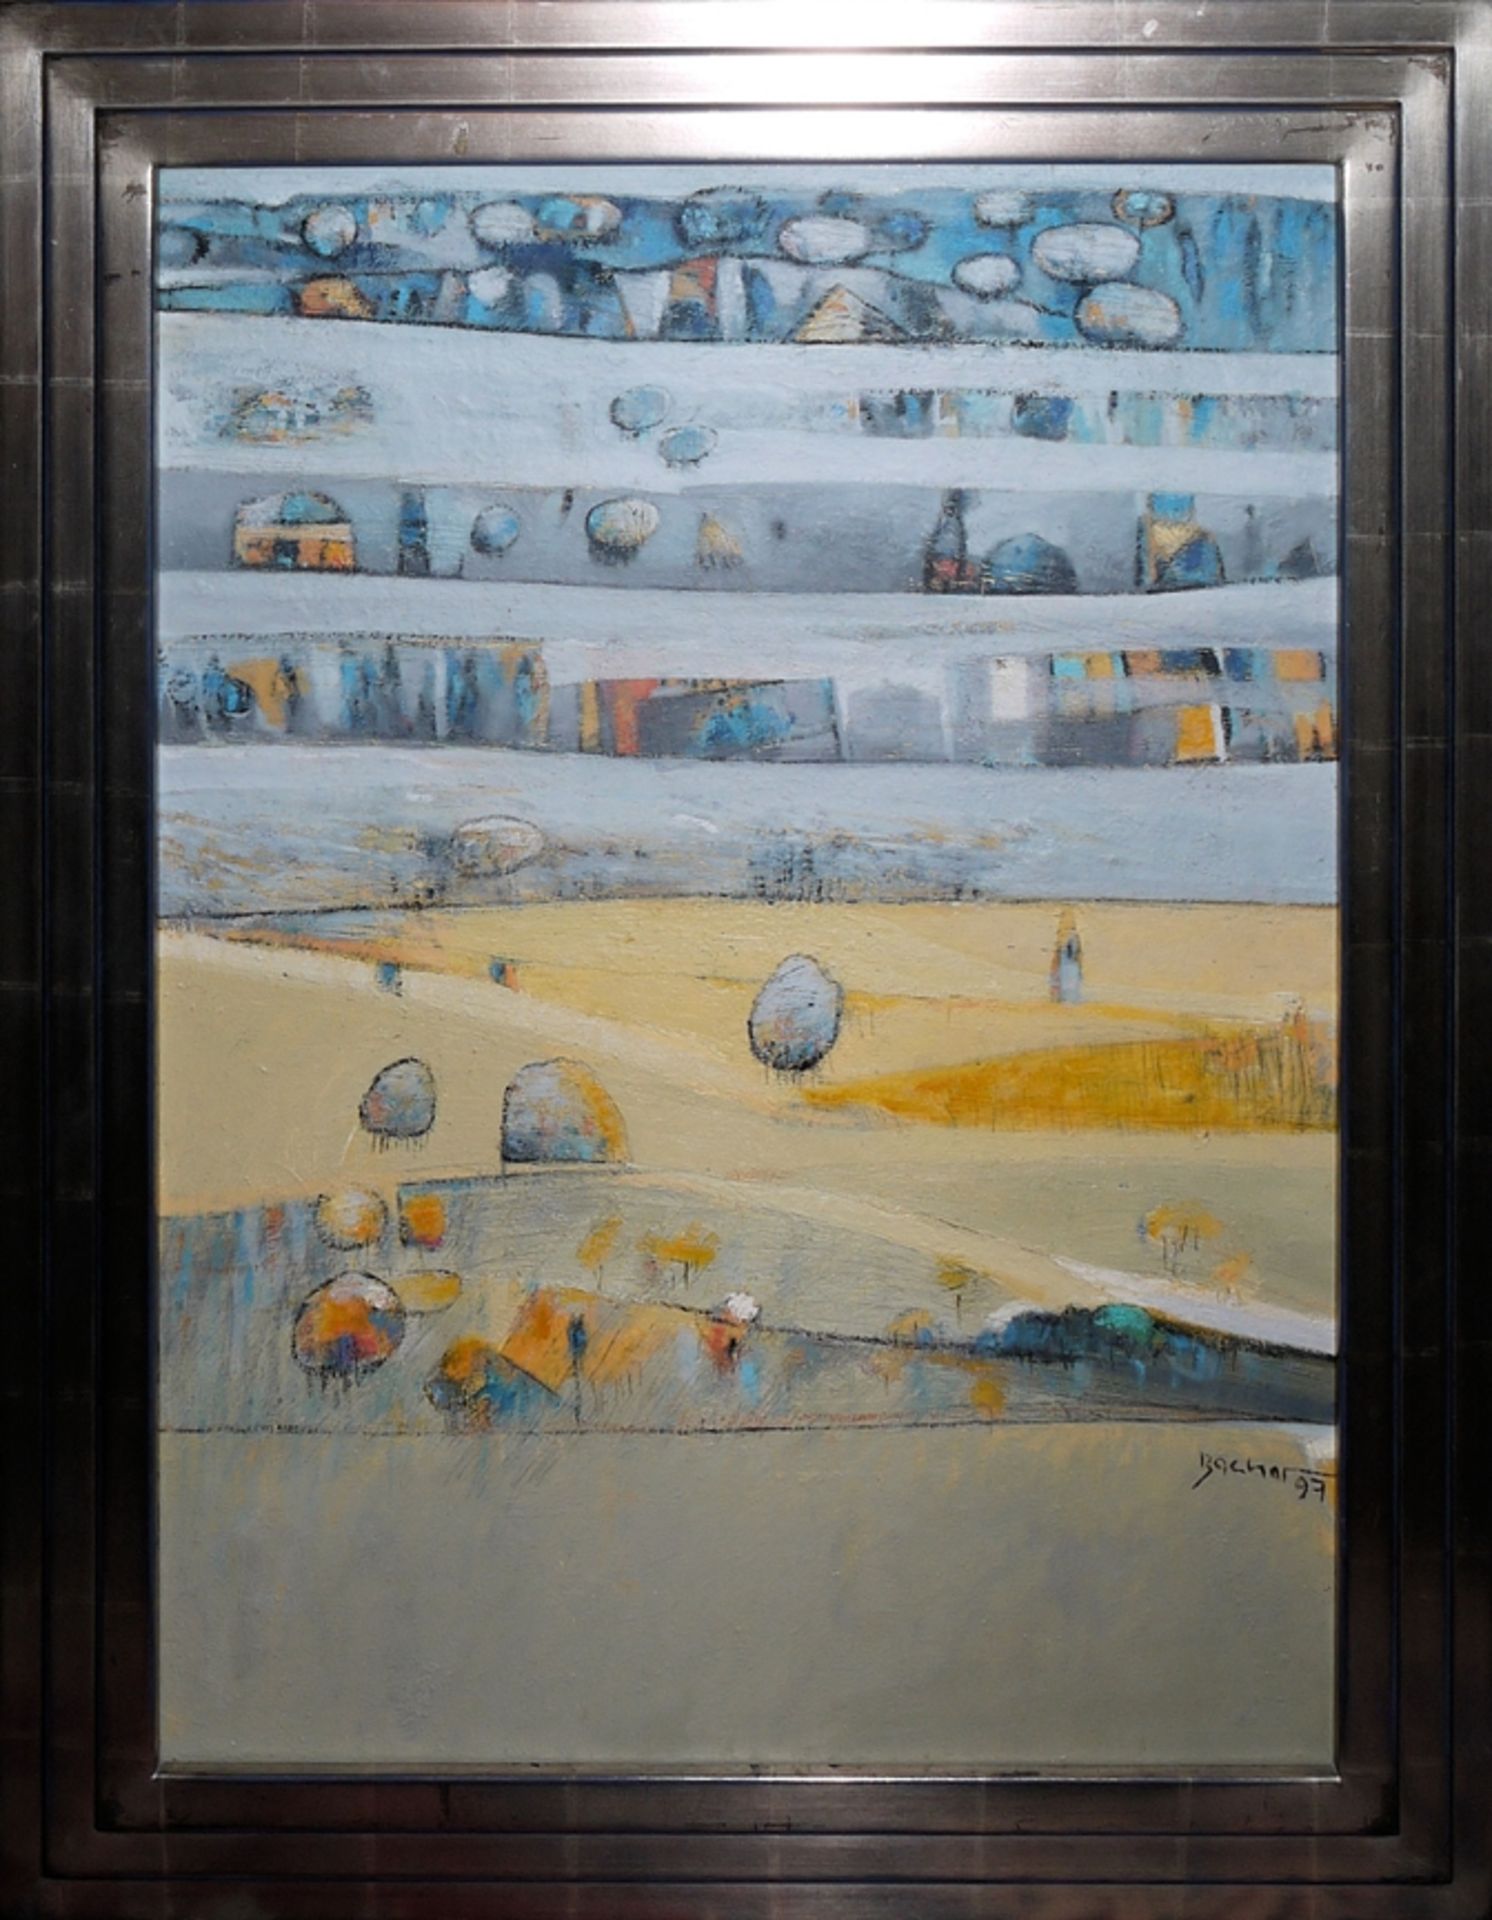 Bachar Al-Issa, Landscape, oil painting from 1997